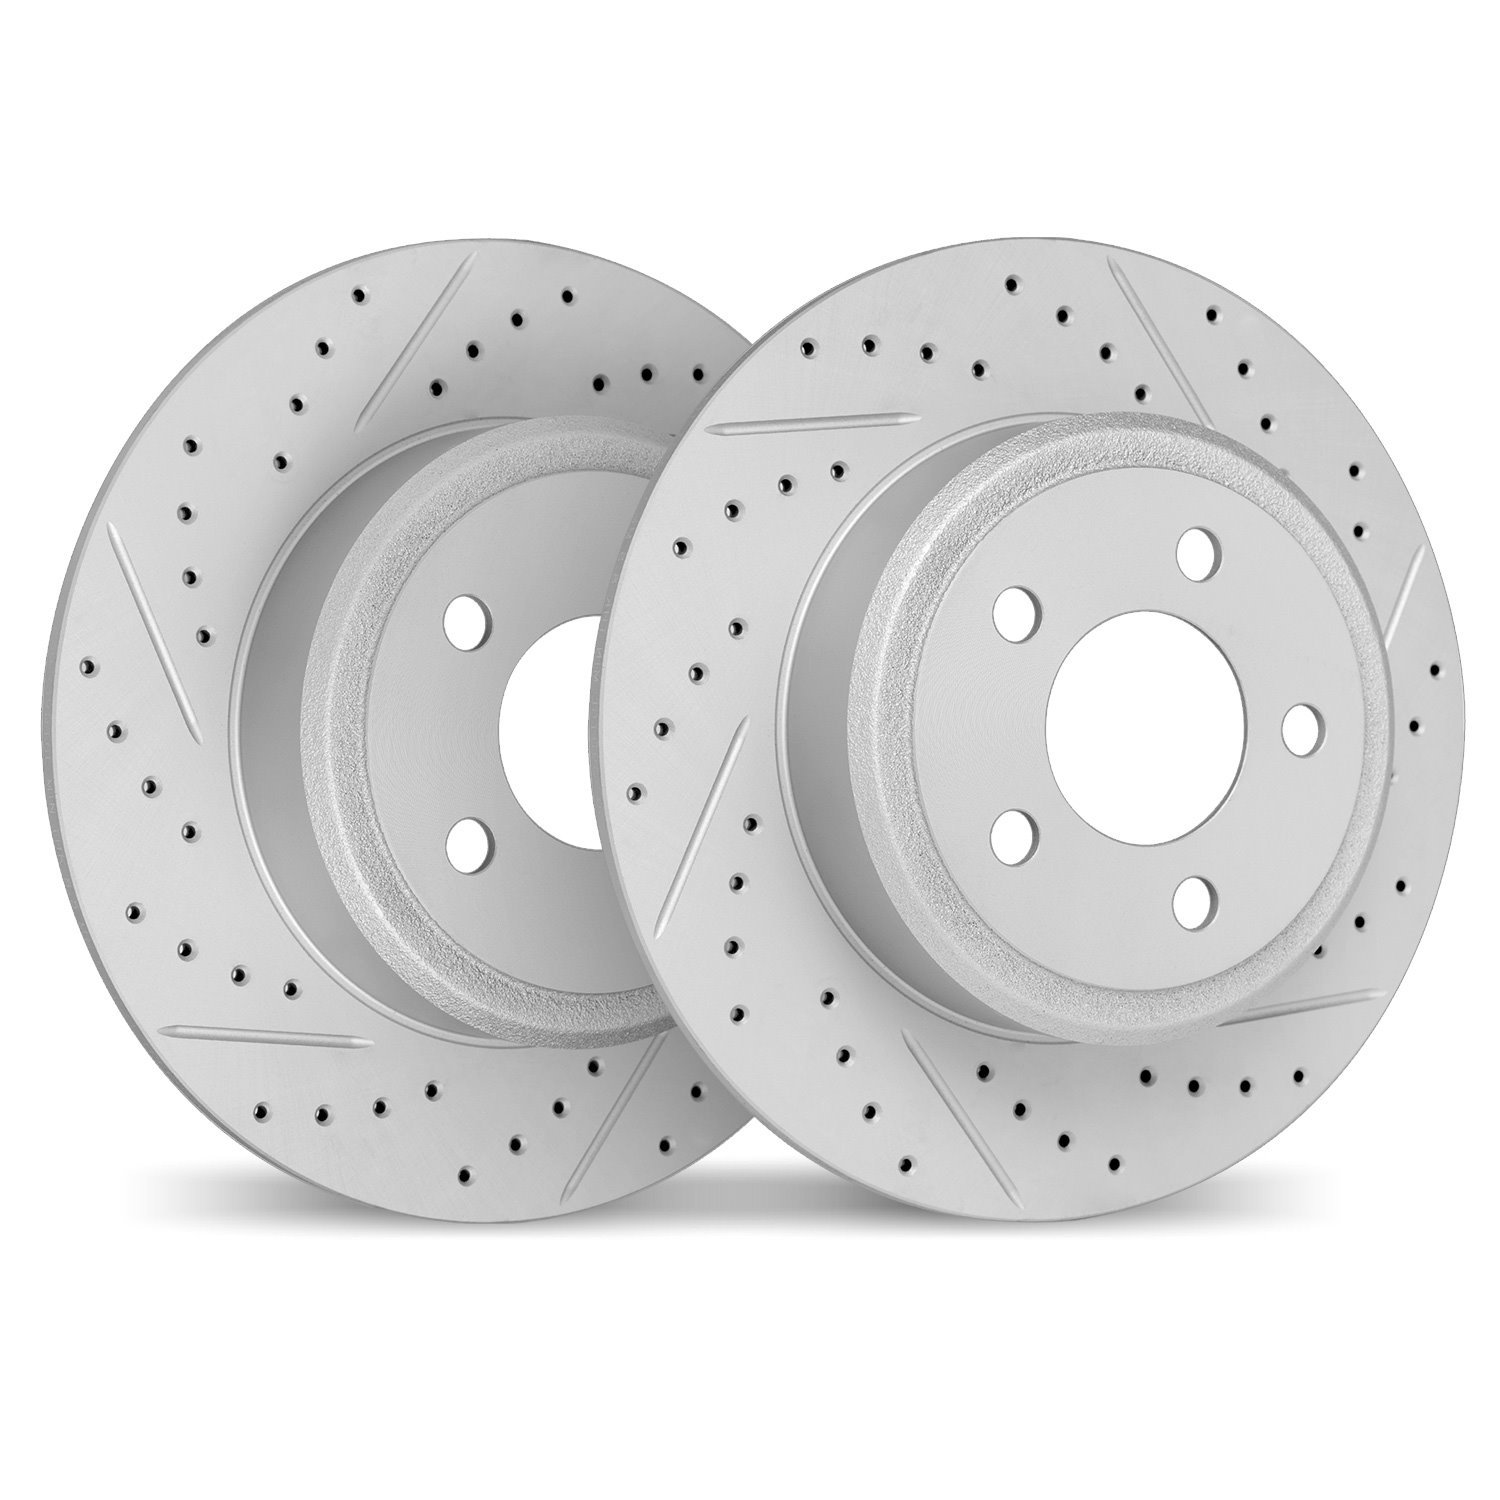 2002-27032 Geoperformance Drilled/Slotted Brake Rotors, 2007-2010 Volvo, Position: Rear